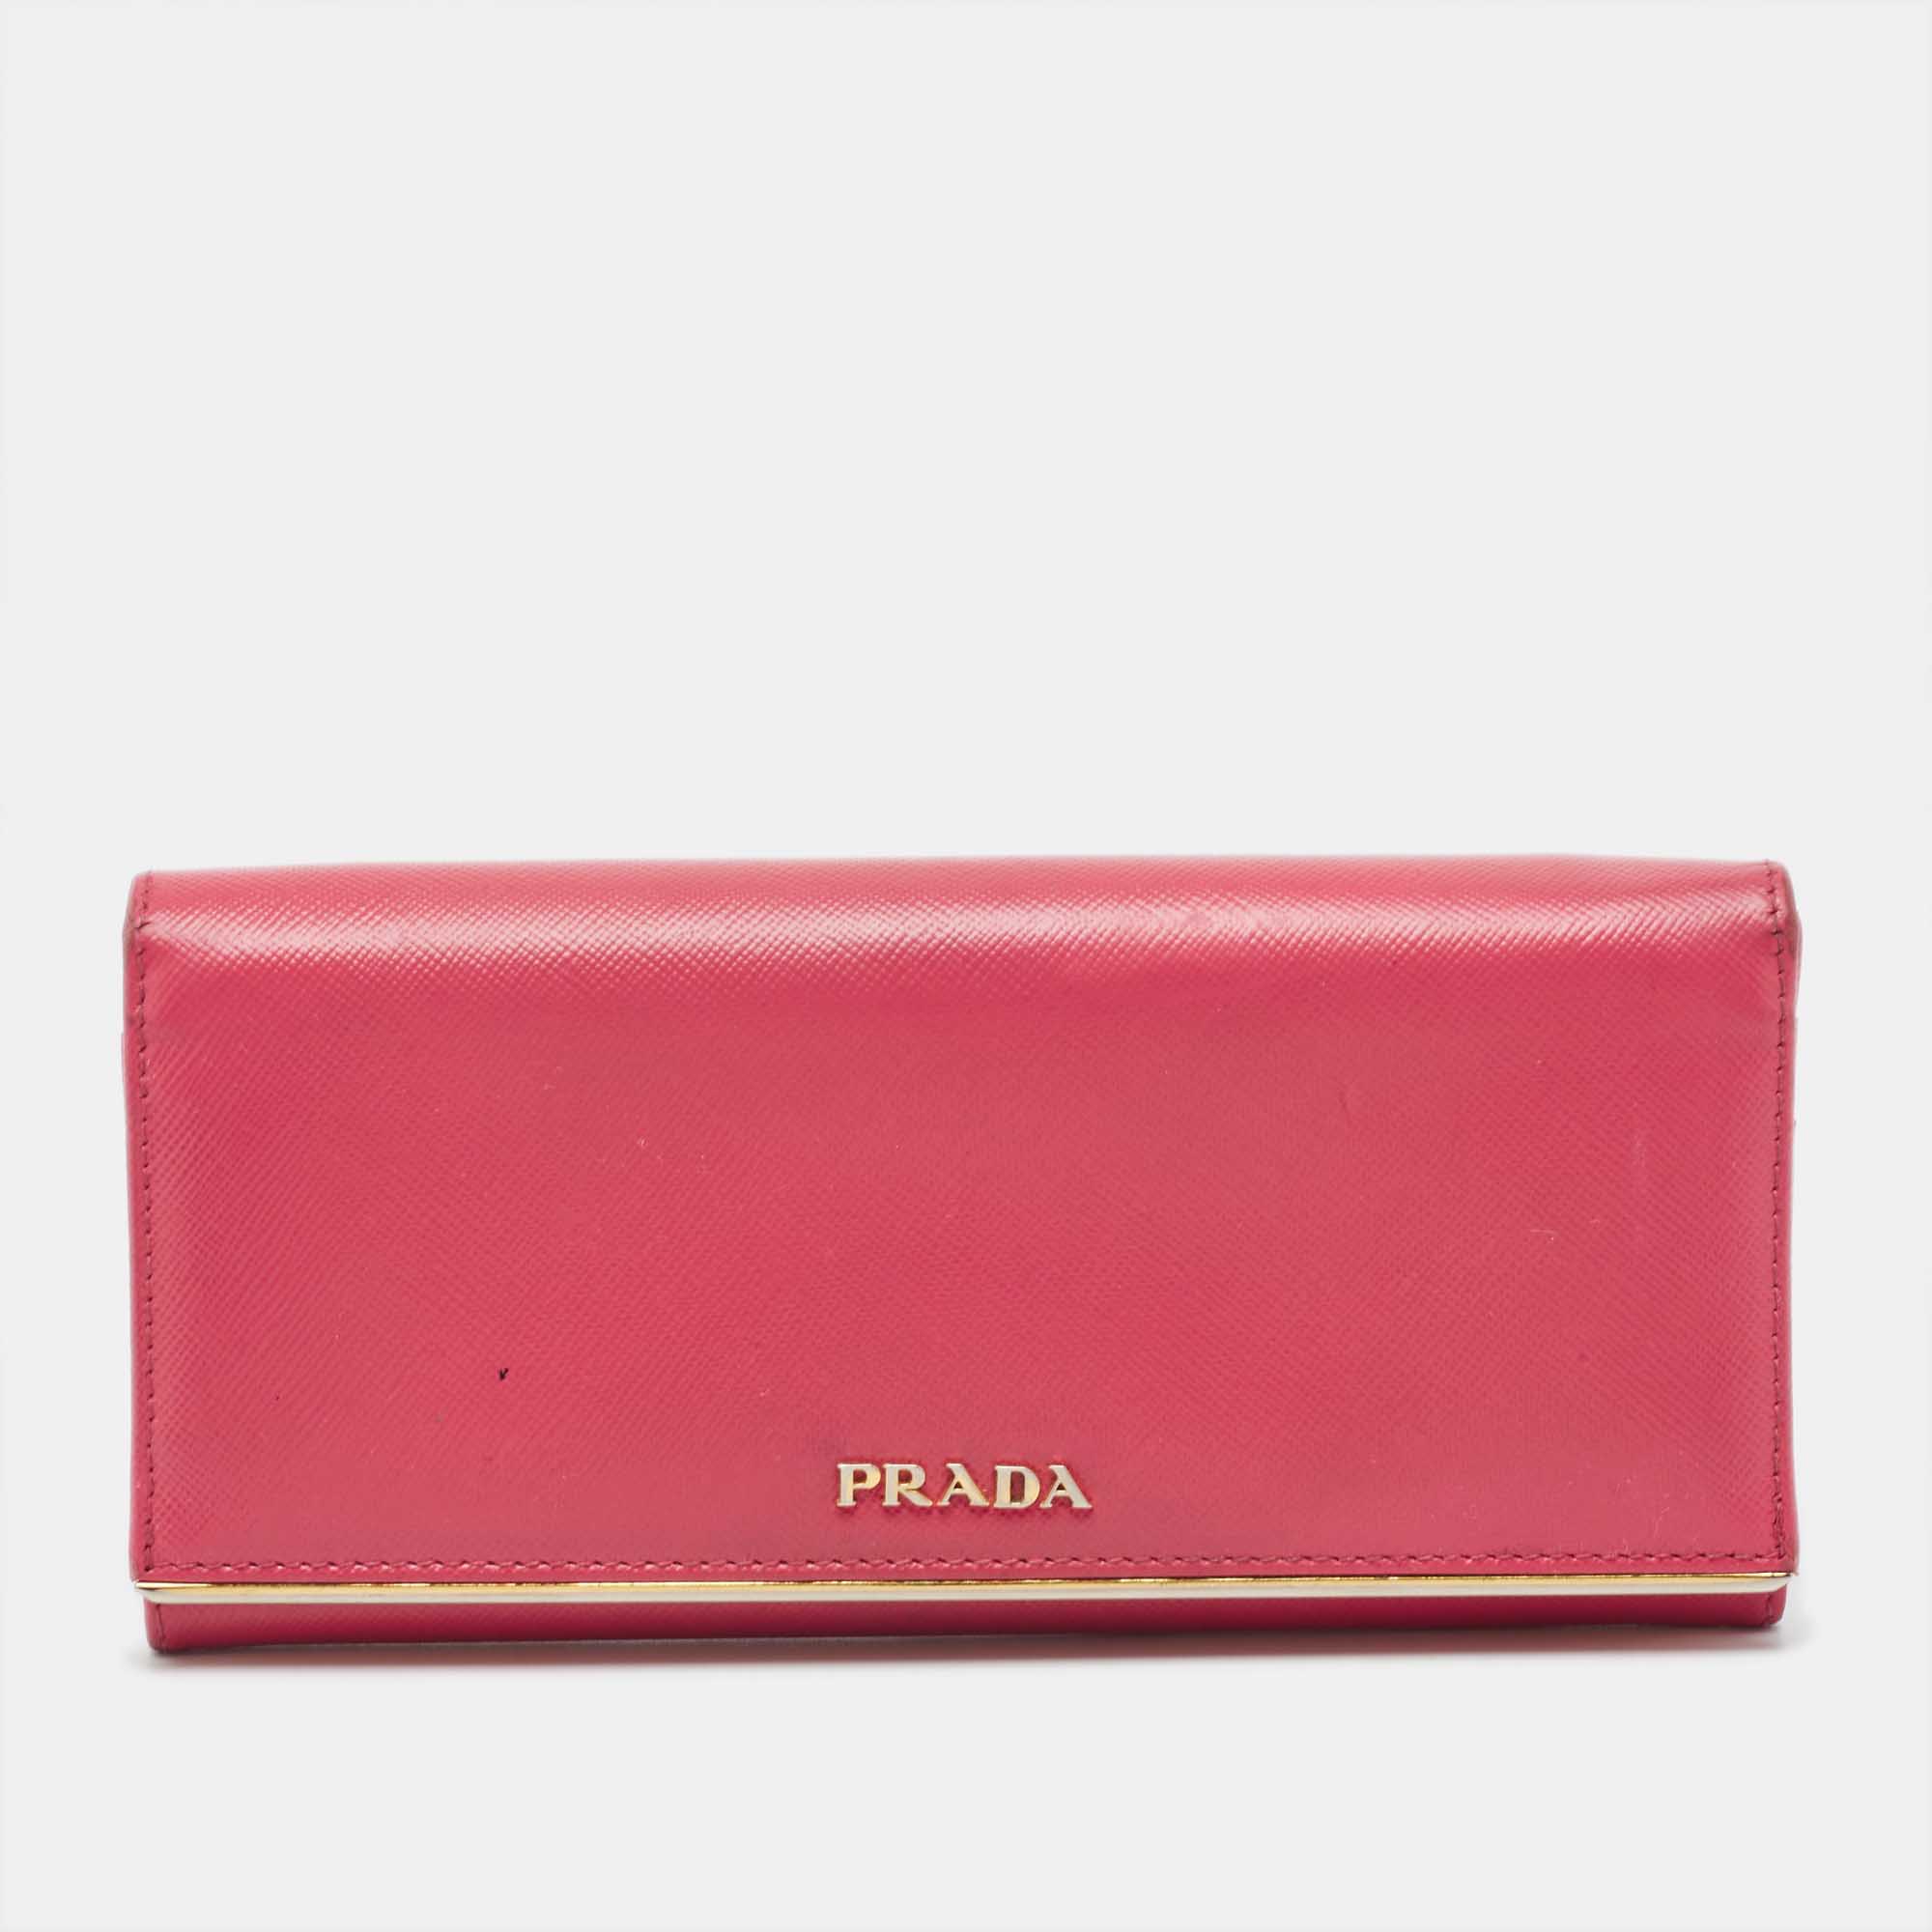 A sophisticated wallet crafted in blush pink Saffiano leather is the season's new style statement. This continental flap wallet by Prada features metal detailing. The front flap closure opens to a leather and fabric lined interior and has card slots and a compartment.